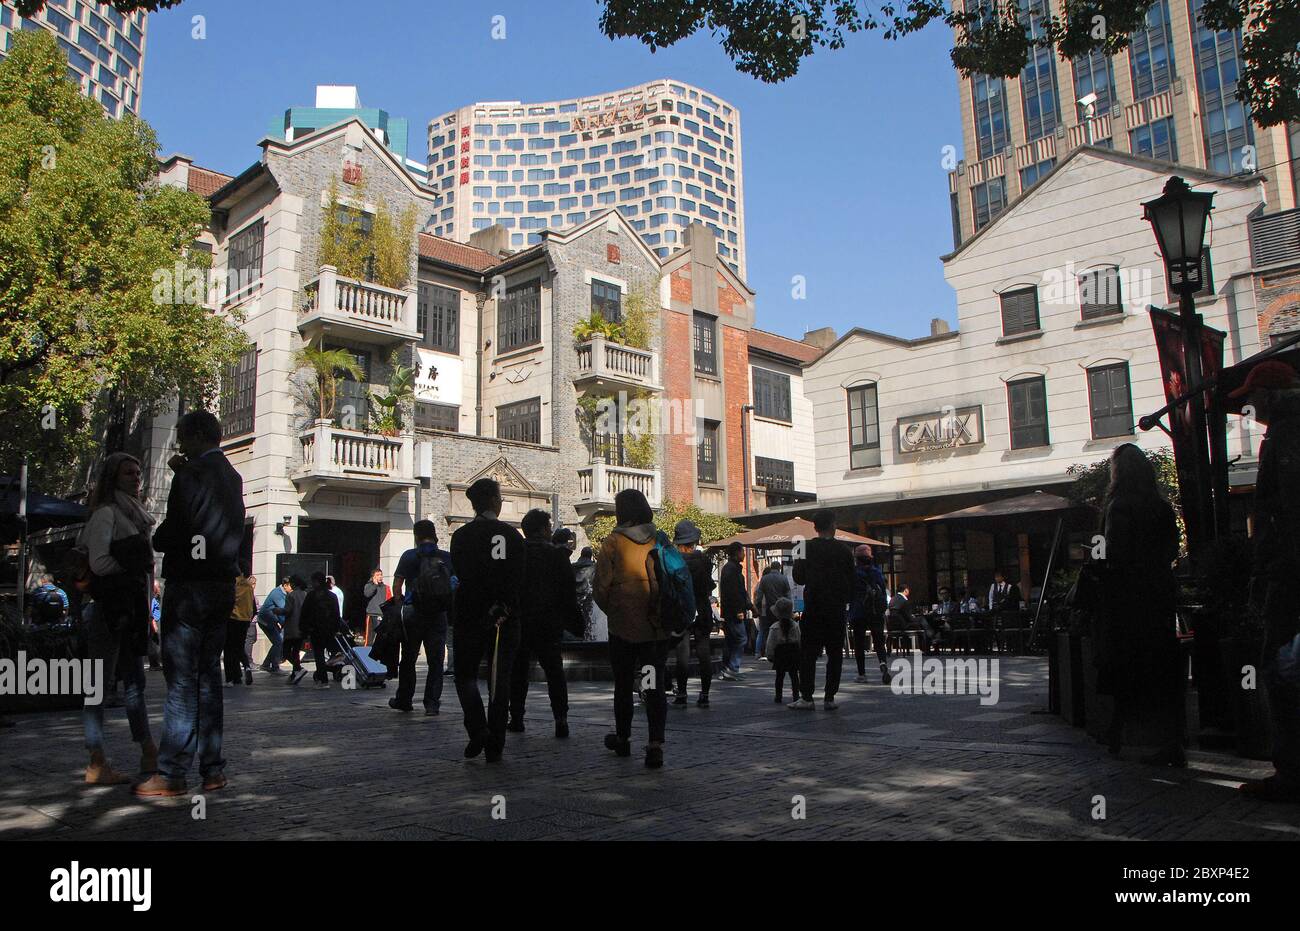 Xintiandi in Shanghai, China . A square in the historic Xintiandi area in Shanghai, now a shopping and entertainment district popular with tourists. Stock Photo